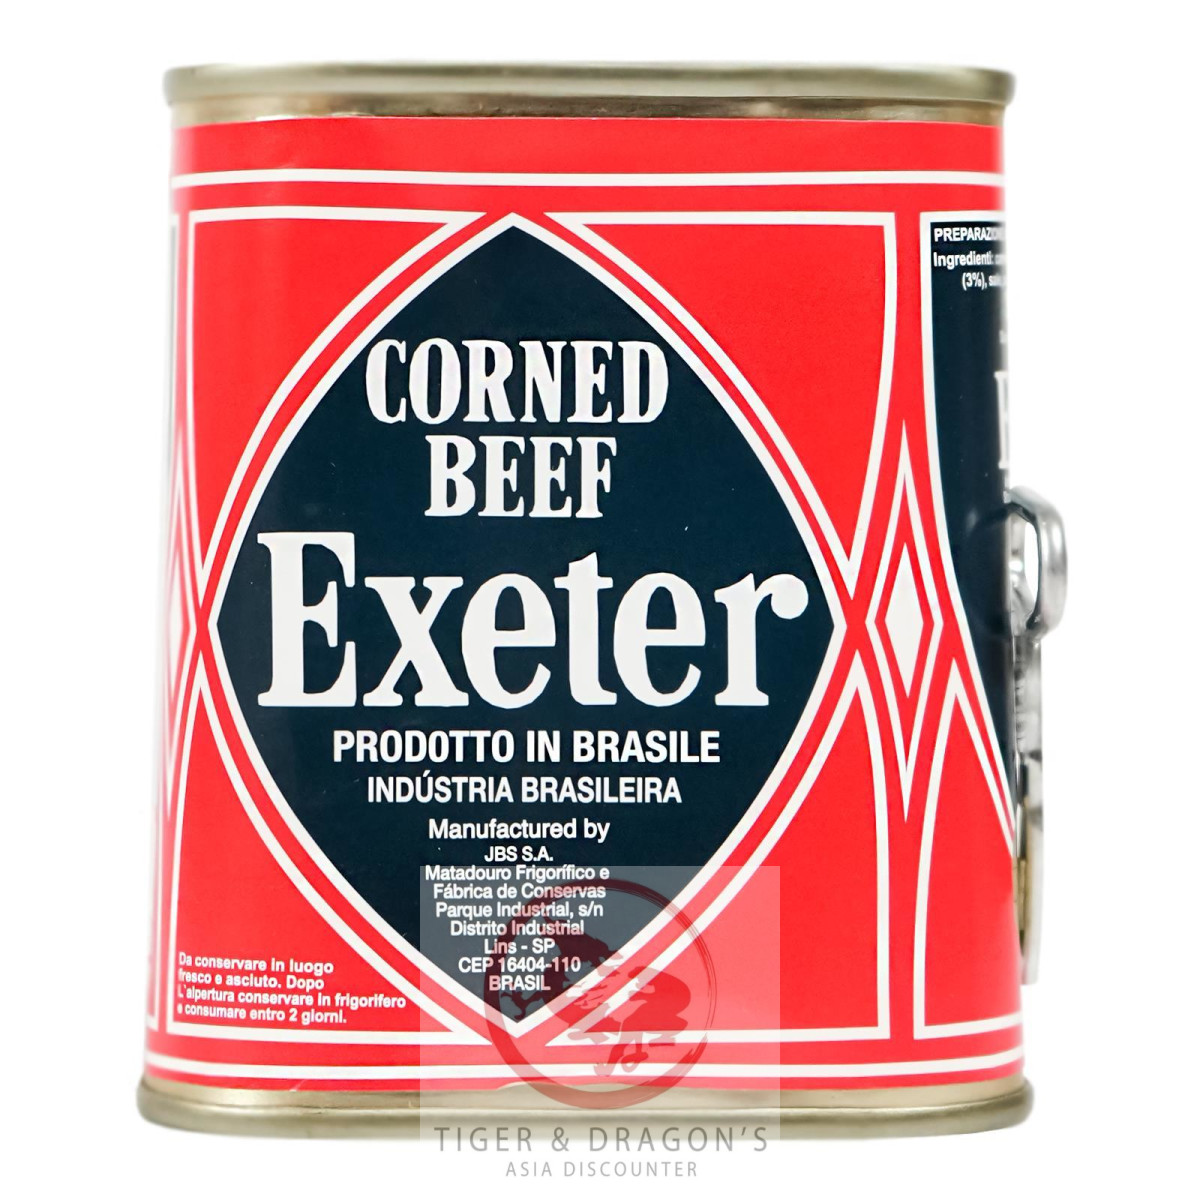 Exeter Corned Beef 340g